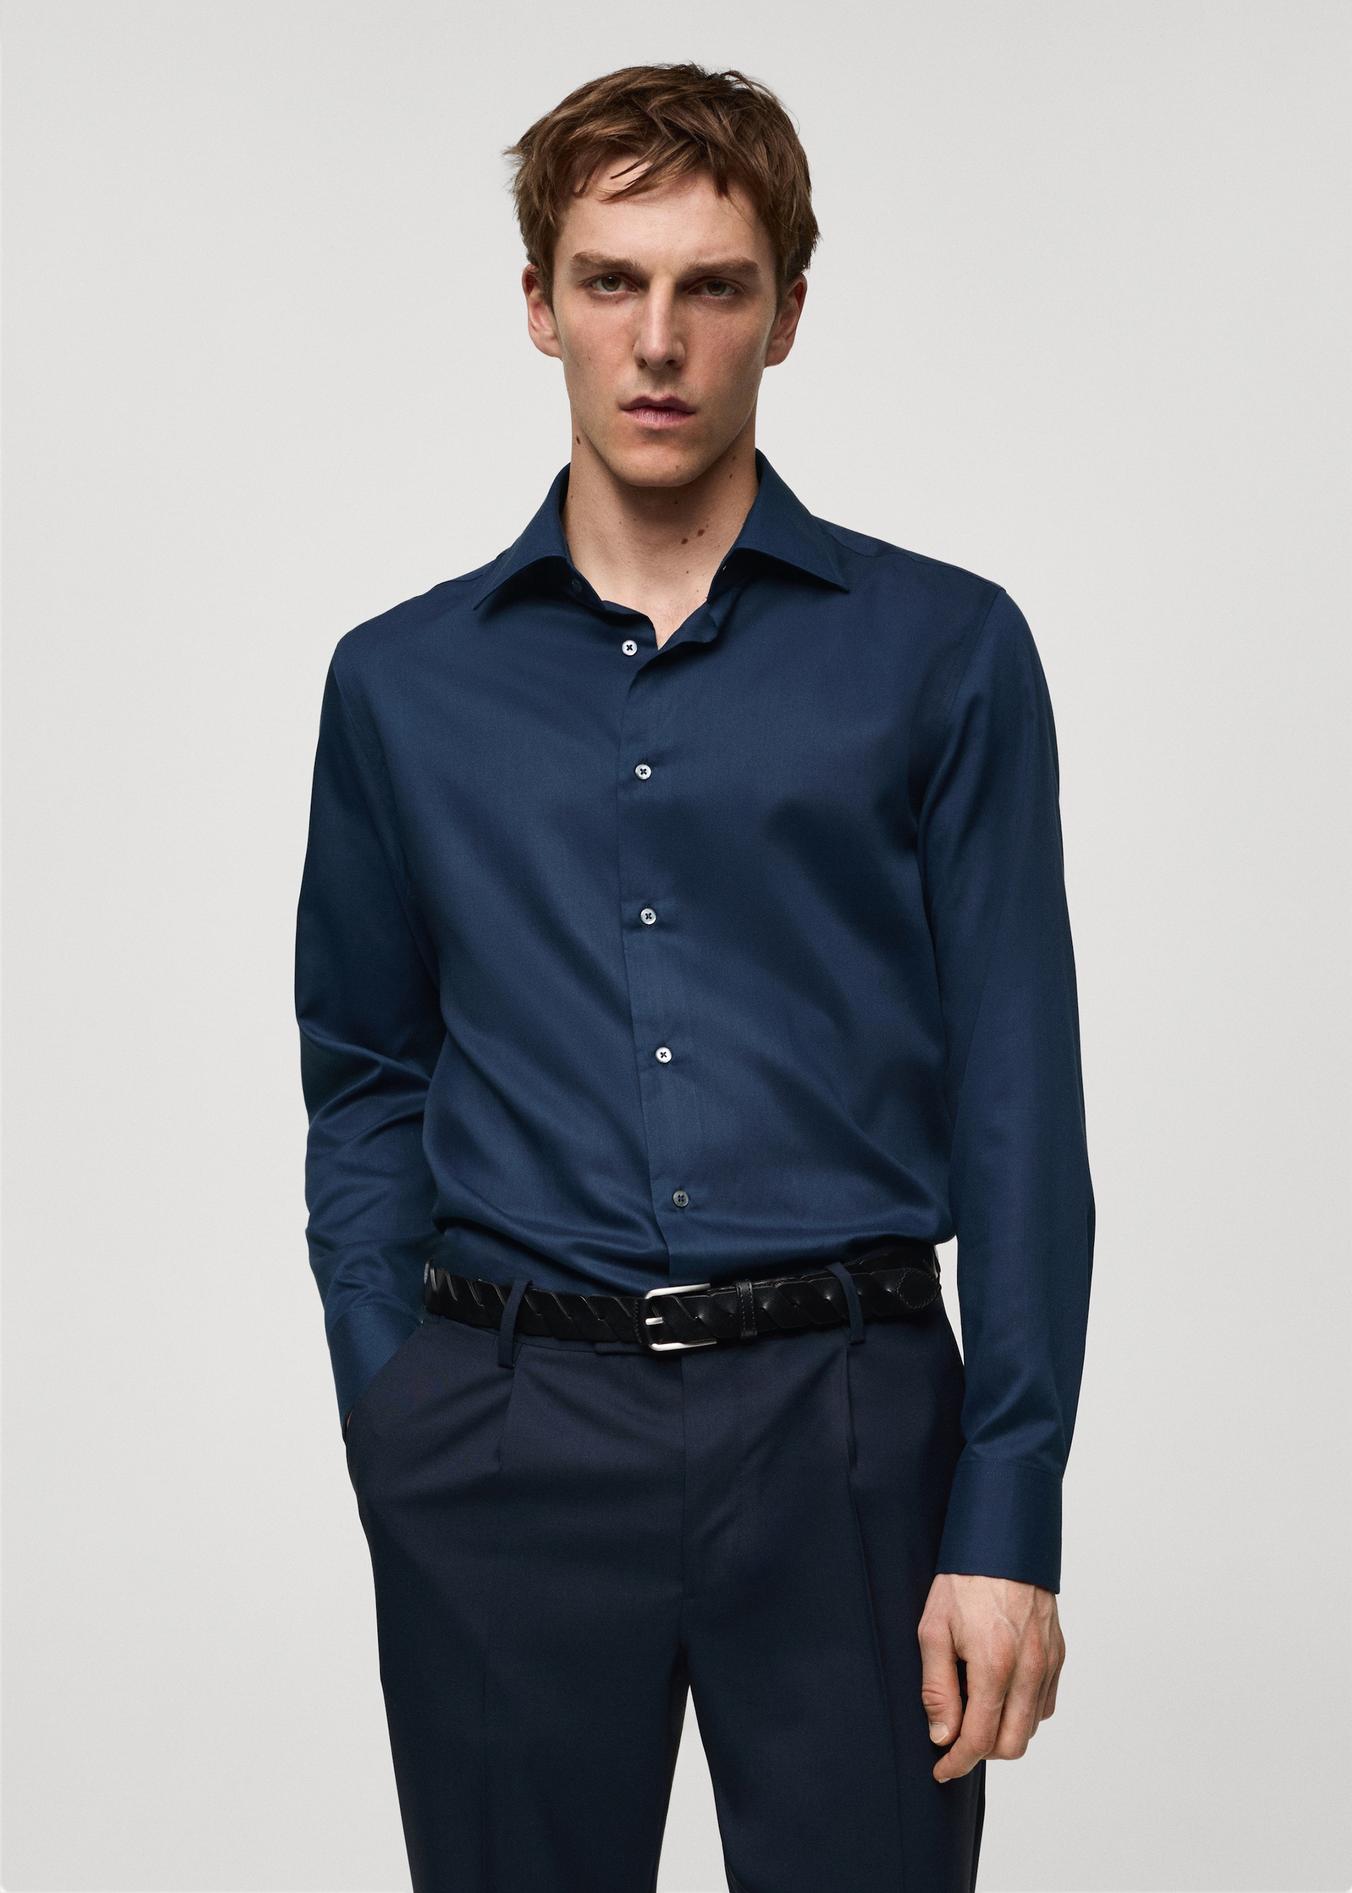 Slim-fit Tencel cotton shirt offers at $119.99 in Mango